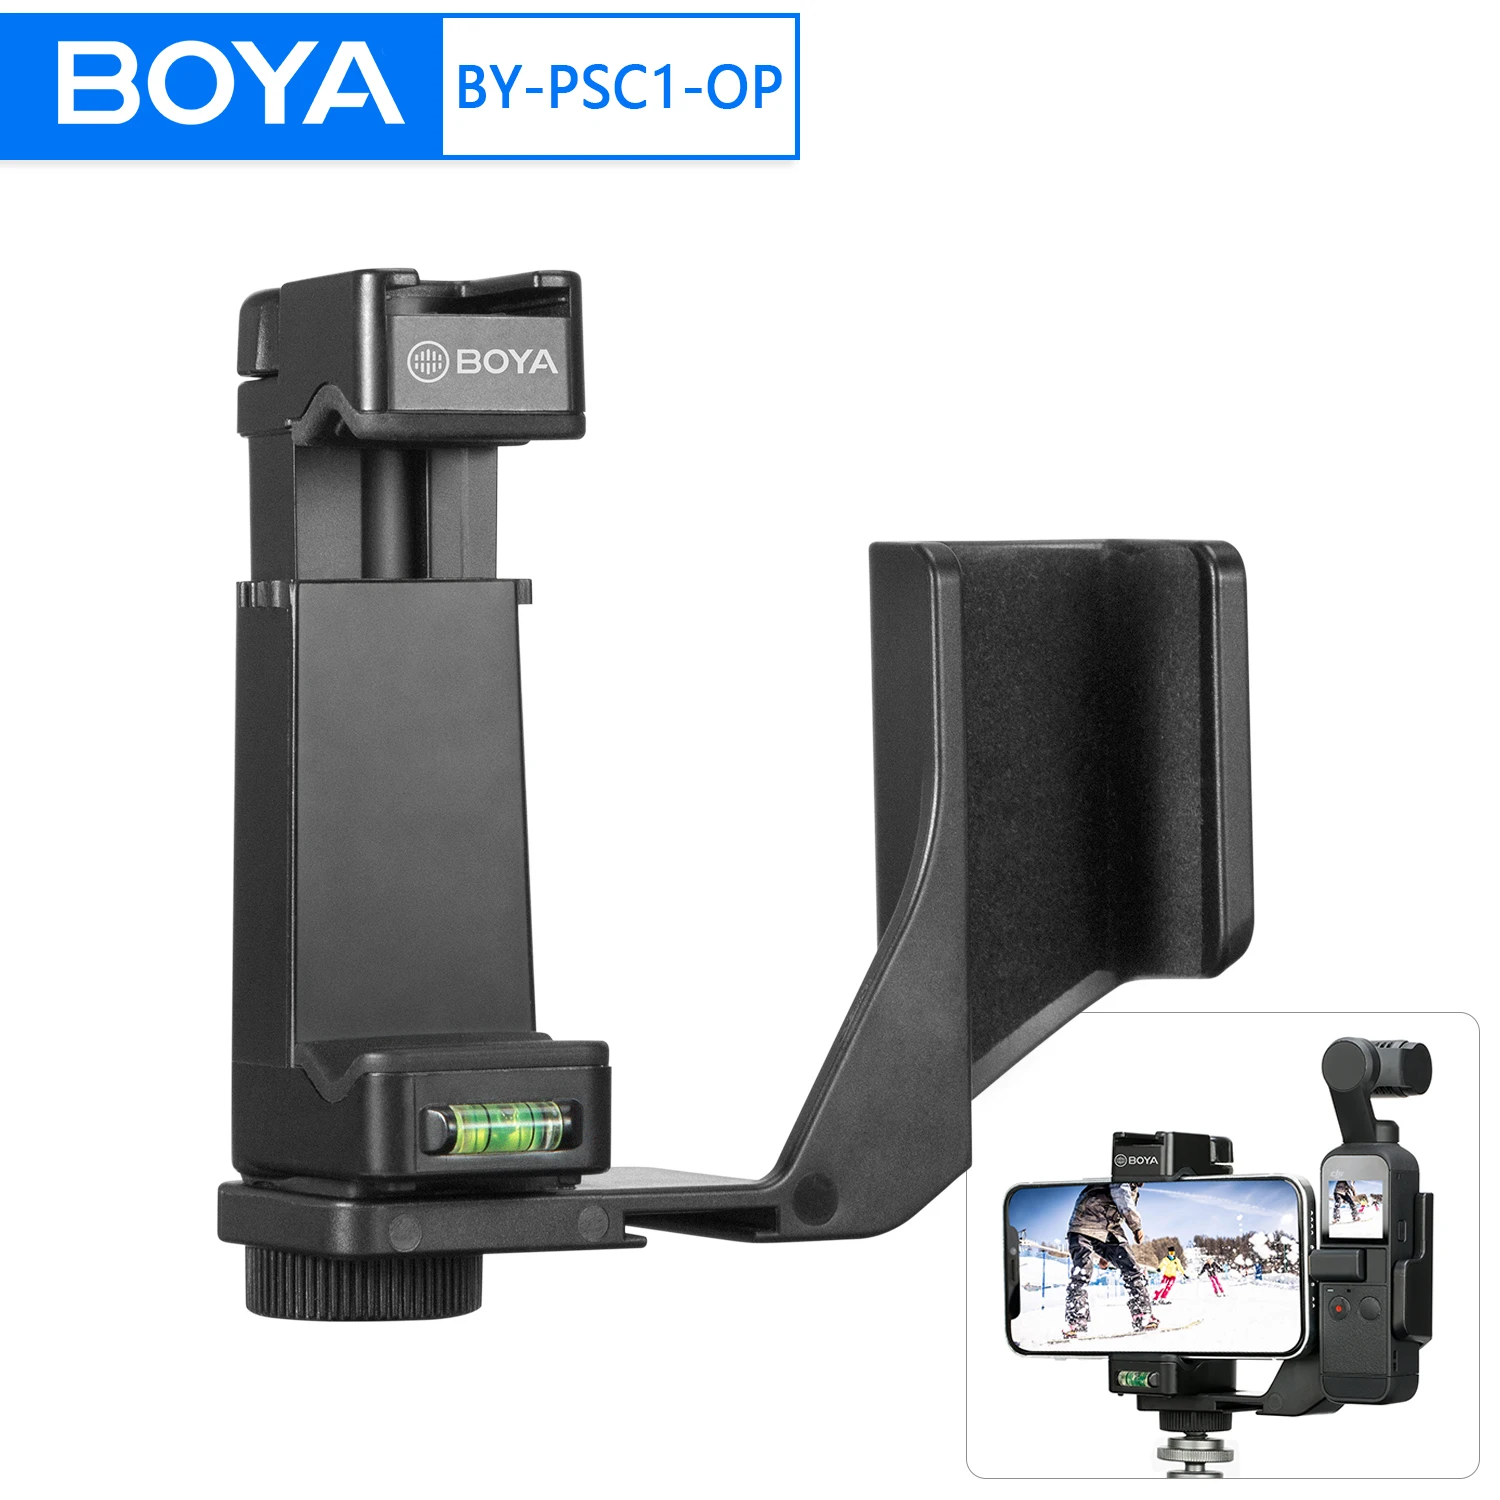 

BOYA BY-PSC1-OP Phone Holder Accessory Smartphone Video Rig with Dual Cold Shoe Mount for DJI OSMO Pocket Vlog Live Streaming